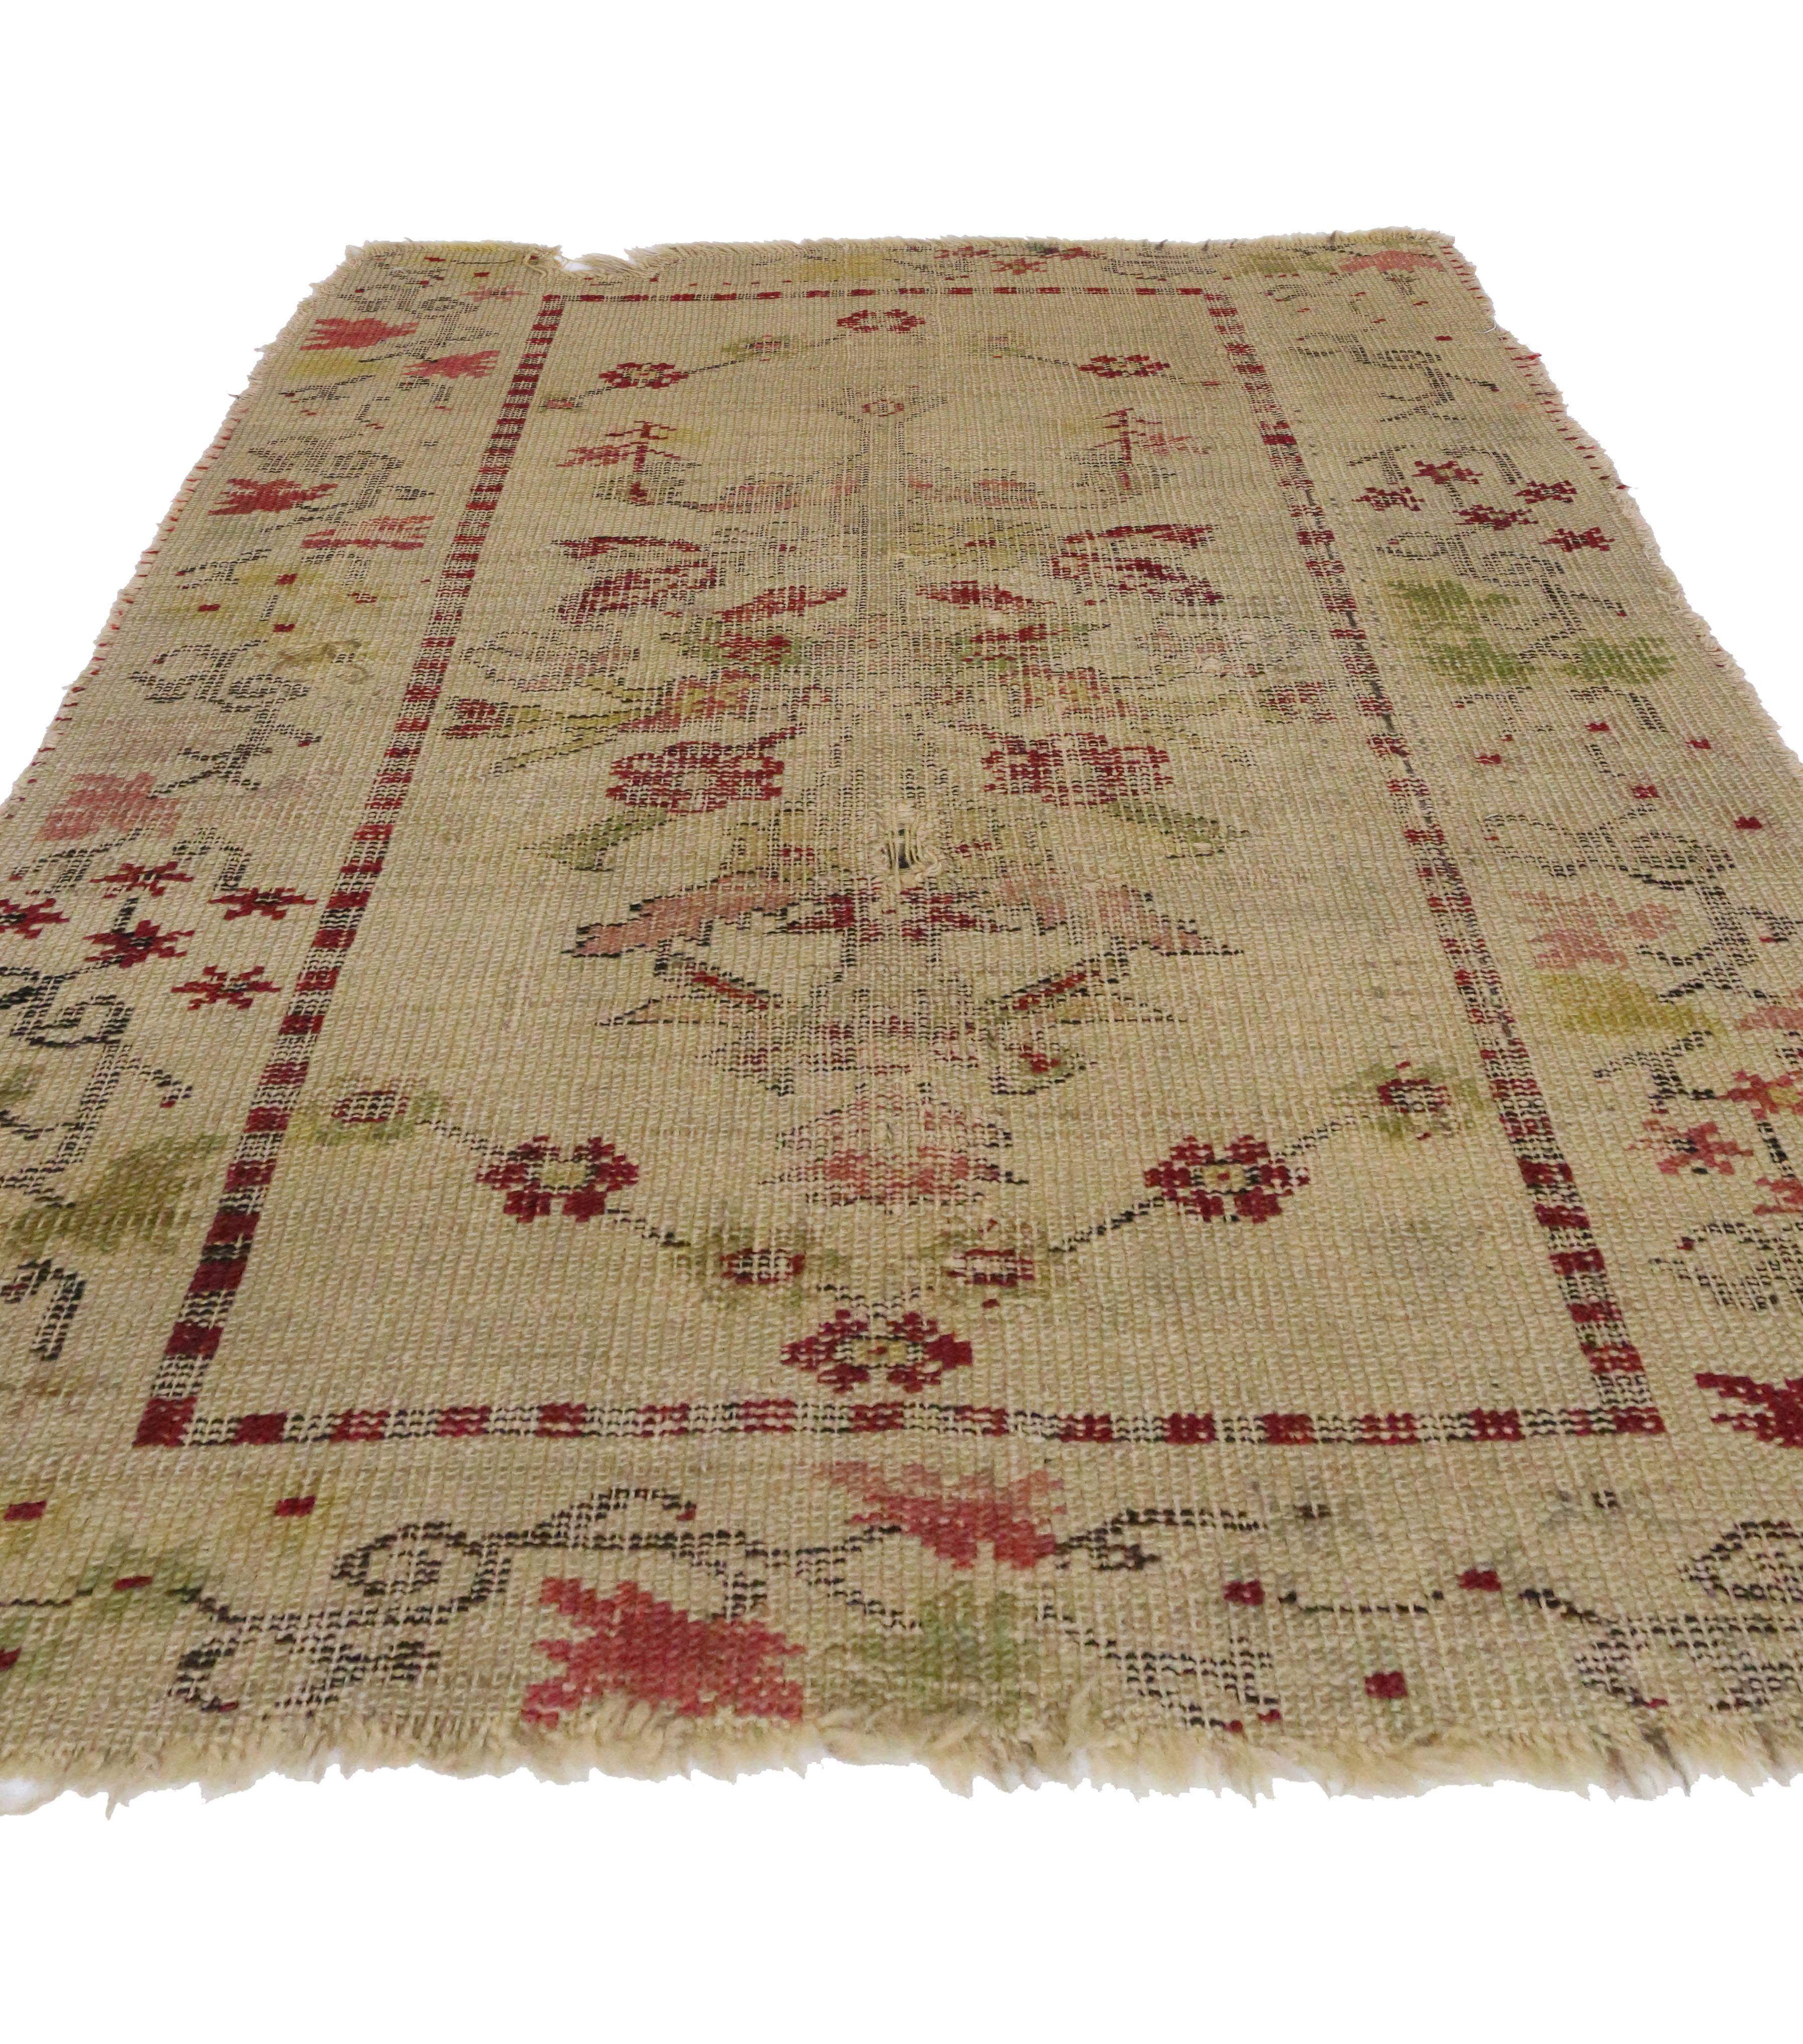 19th Century Distressed Vintage Turkish Oushak Accent Rug, Worn-In Farmhouse Chic For Sale